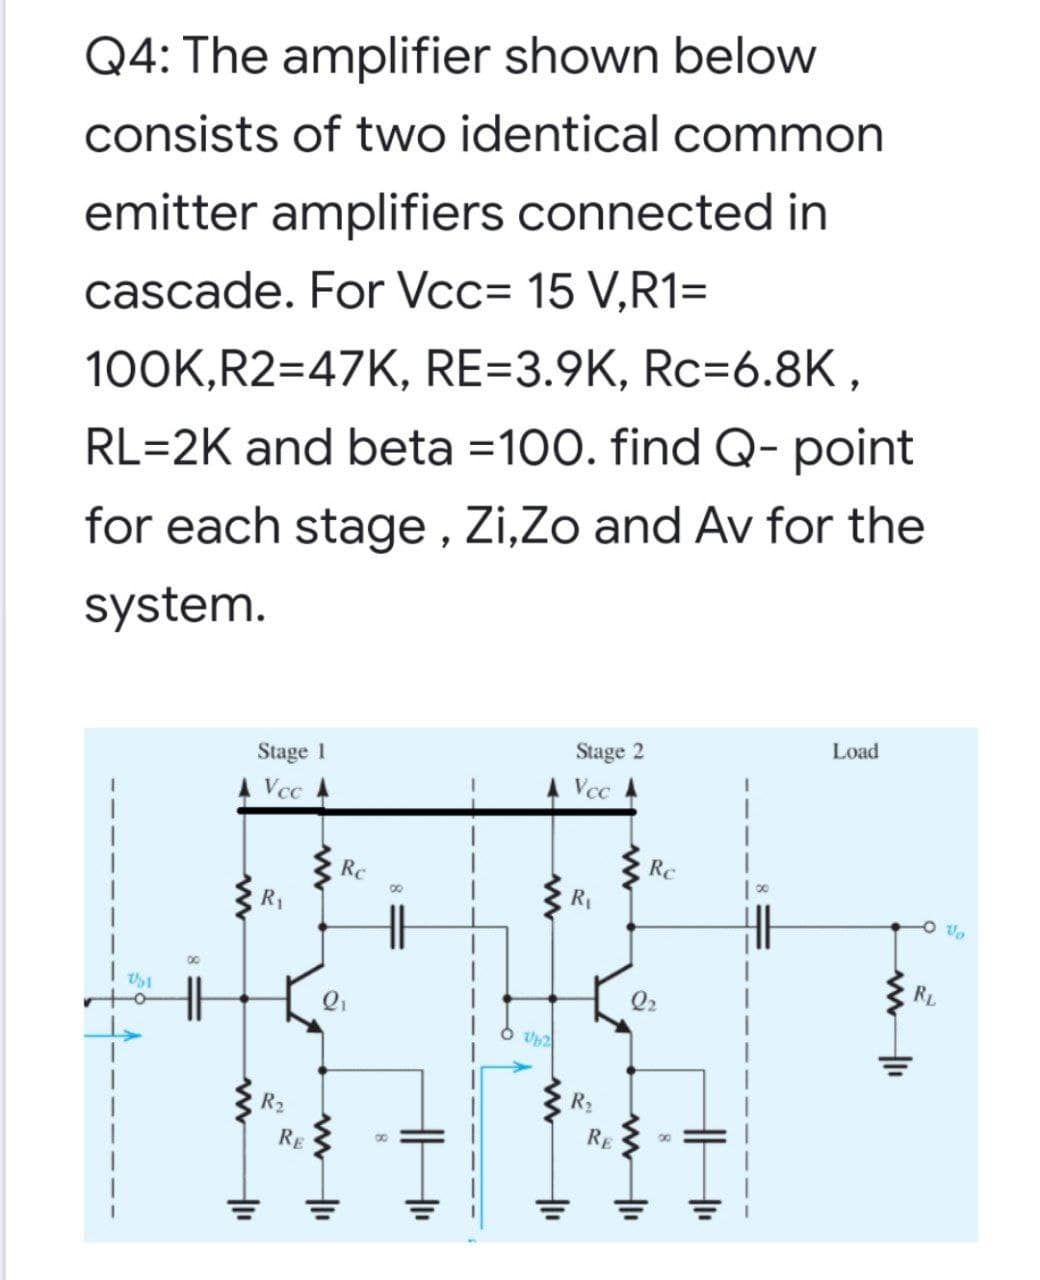 Q4: The amplifier shown below
consists of two identical common
emitter amplifiers connected in
cascade. For Vcc= 15 V,R1=
100K,R2=47K, RE=3.9K, Rc=6.8K,
RL=2K and beta =100. find Q- point
for each stage , Zi,Zo and Av for the
system.
Load
Stage 2
Stage 1
A Vcc
A Vcc
Rc
Rc
R1
00
R1
O vo
RL
Q2
R2
R2
RE
RE
